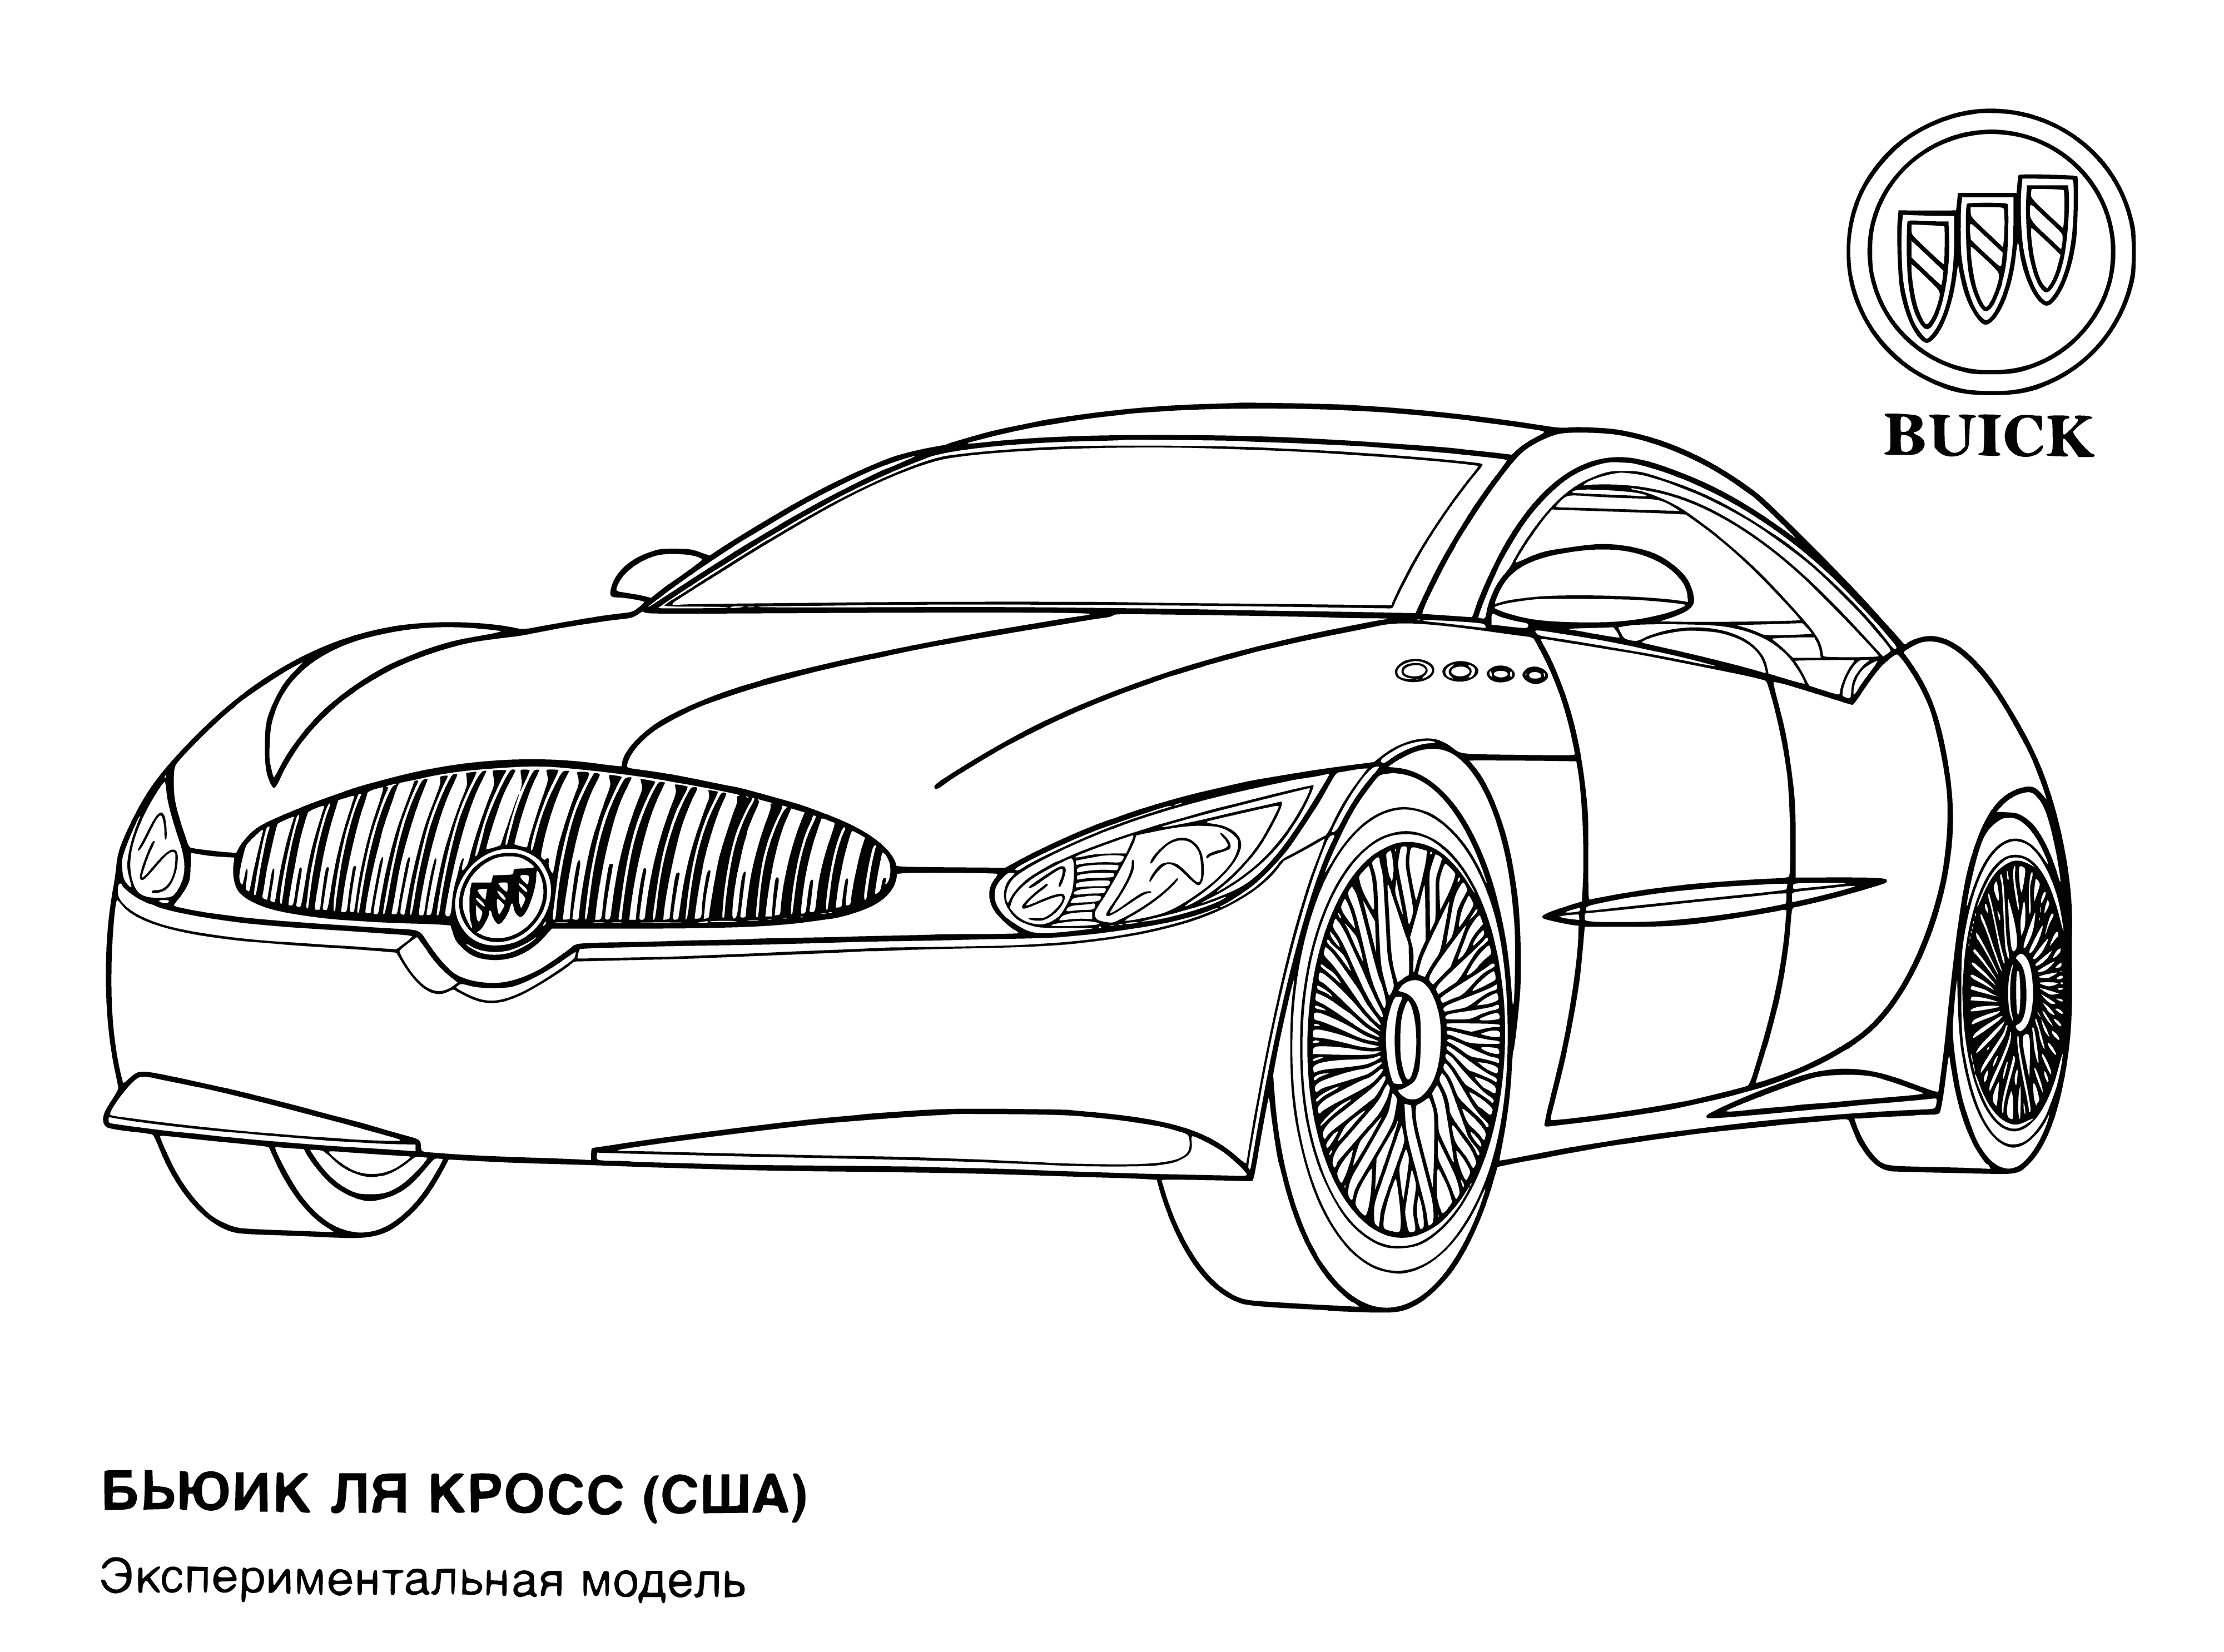 coloring page: 3 Buick vehicles: sedan, SUV & convertible; all with the iconic Buick logo. Color to explore the newest models.